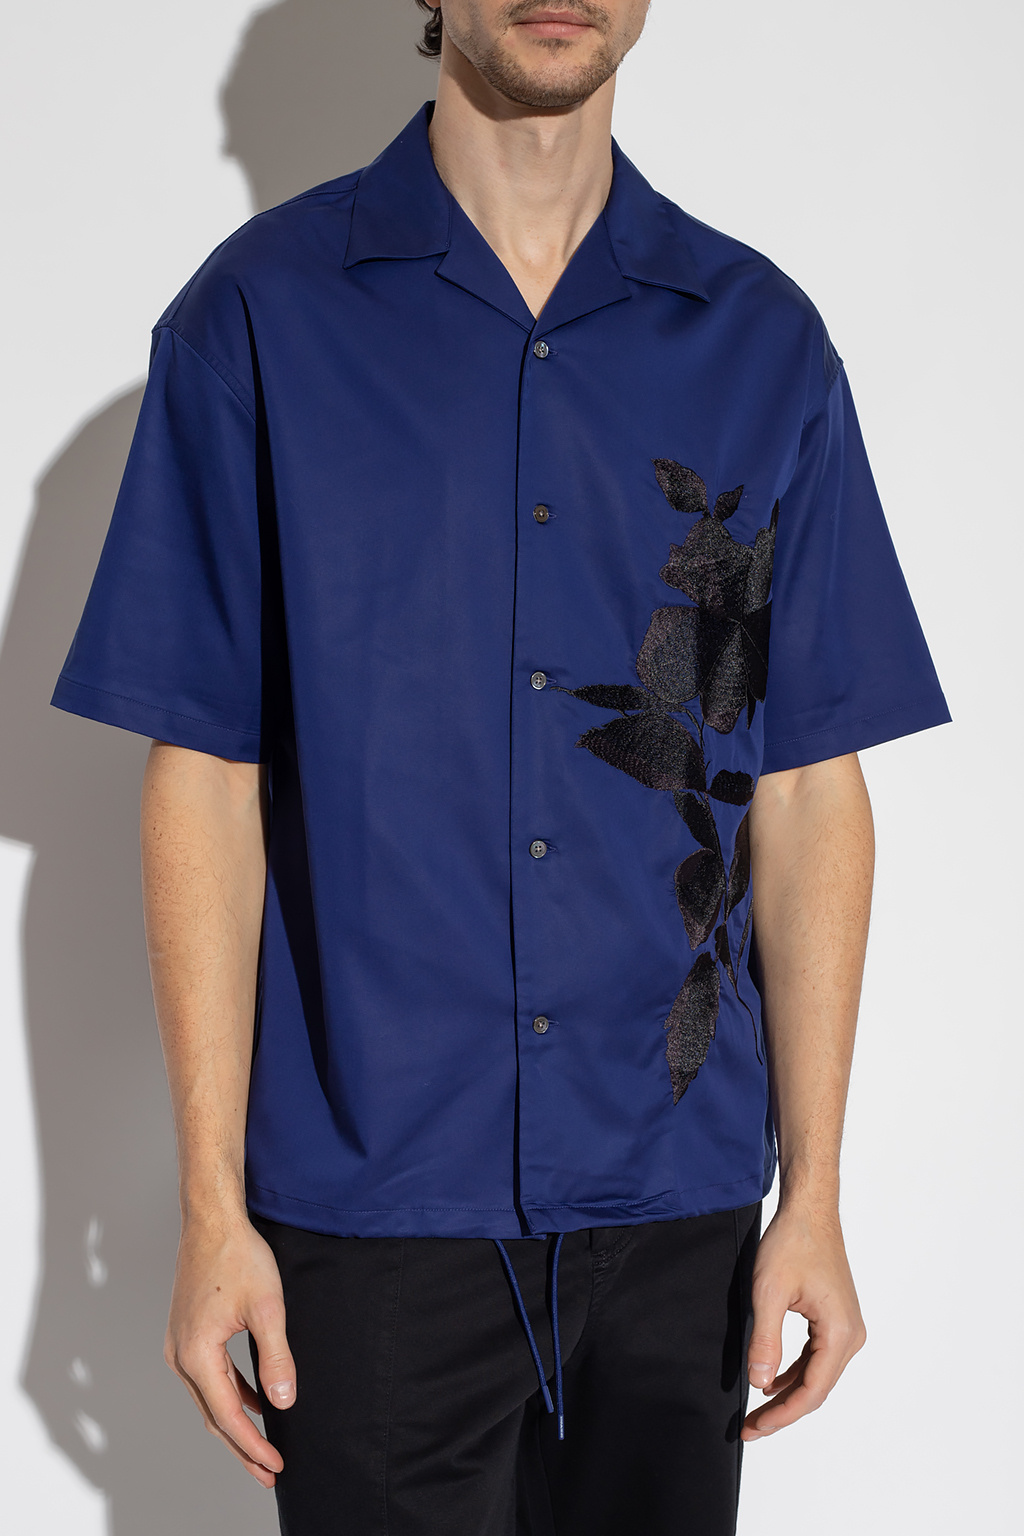 Emporio PATTERNED armani Shirt with floral motif